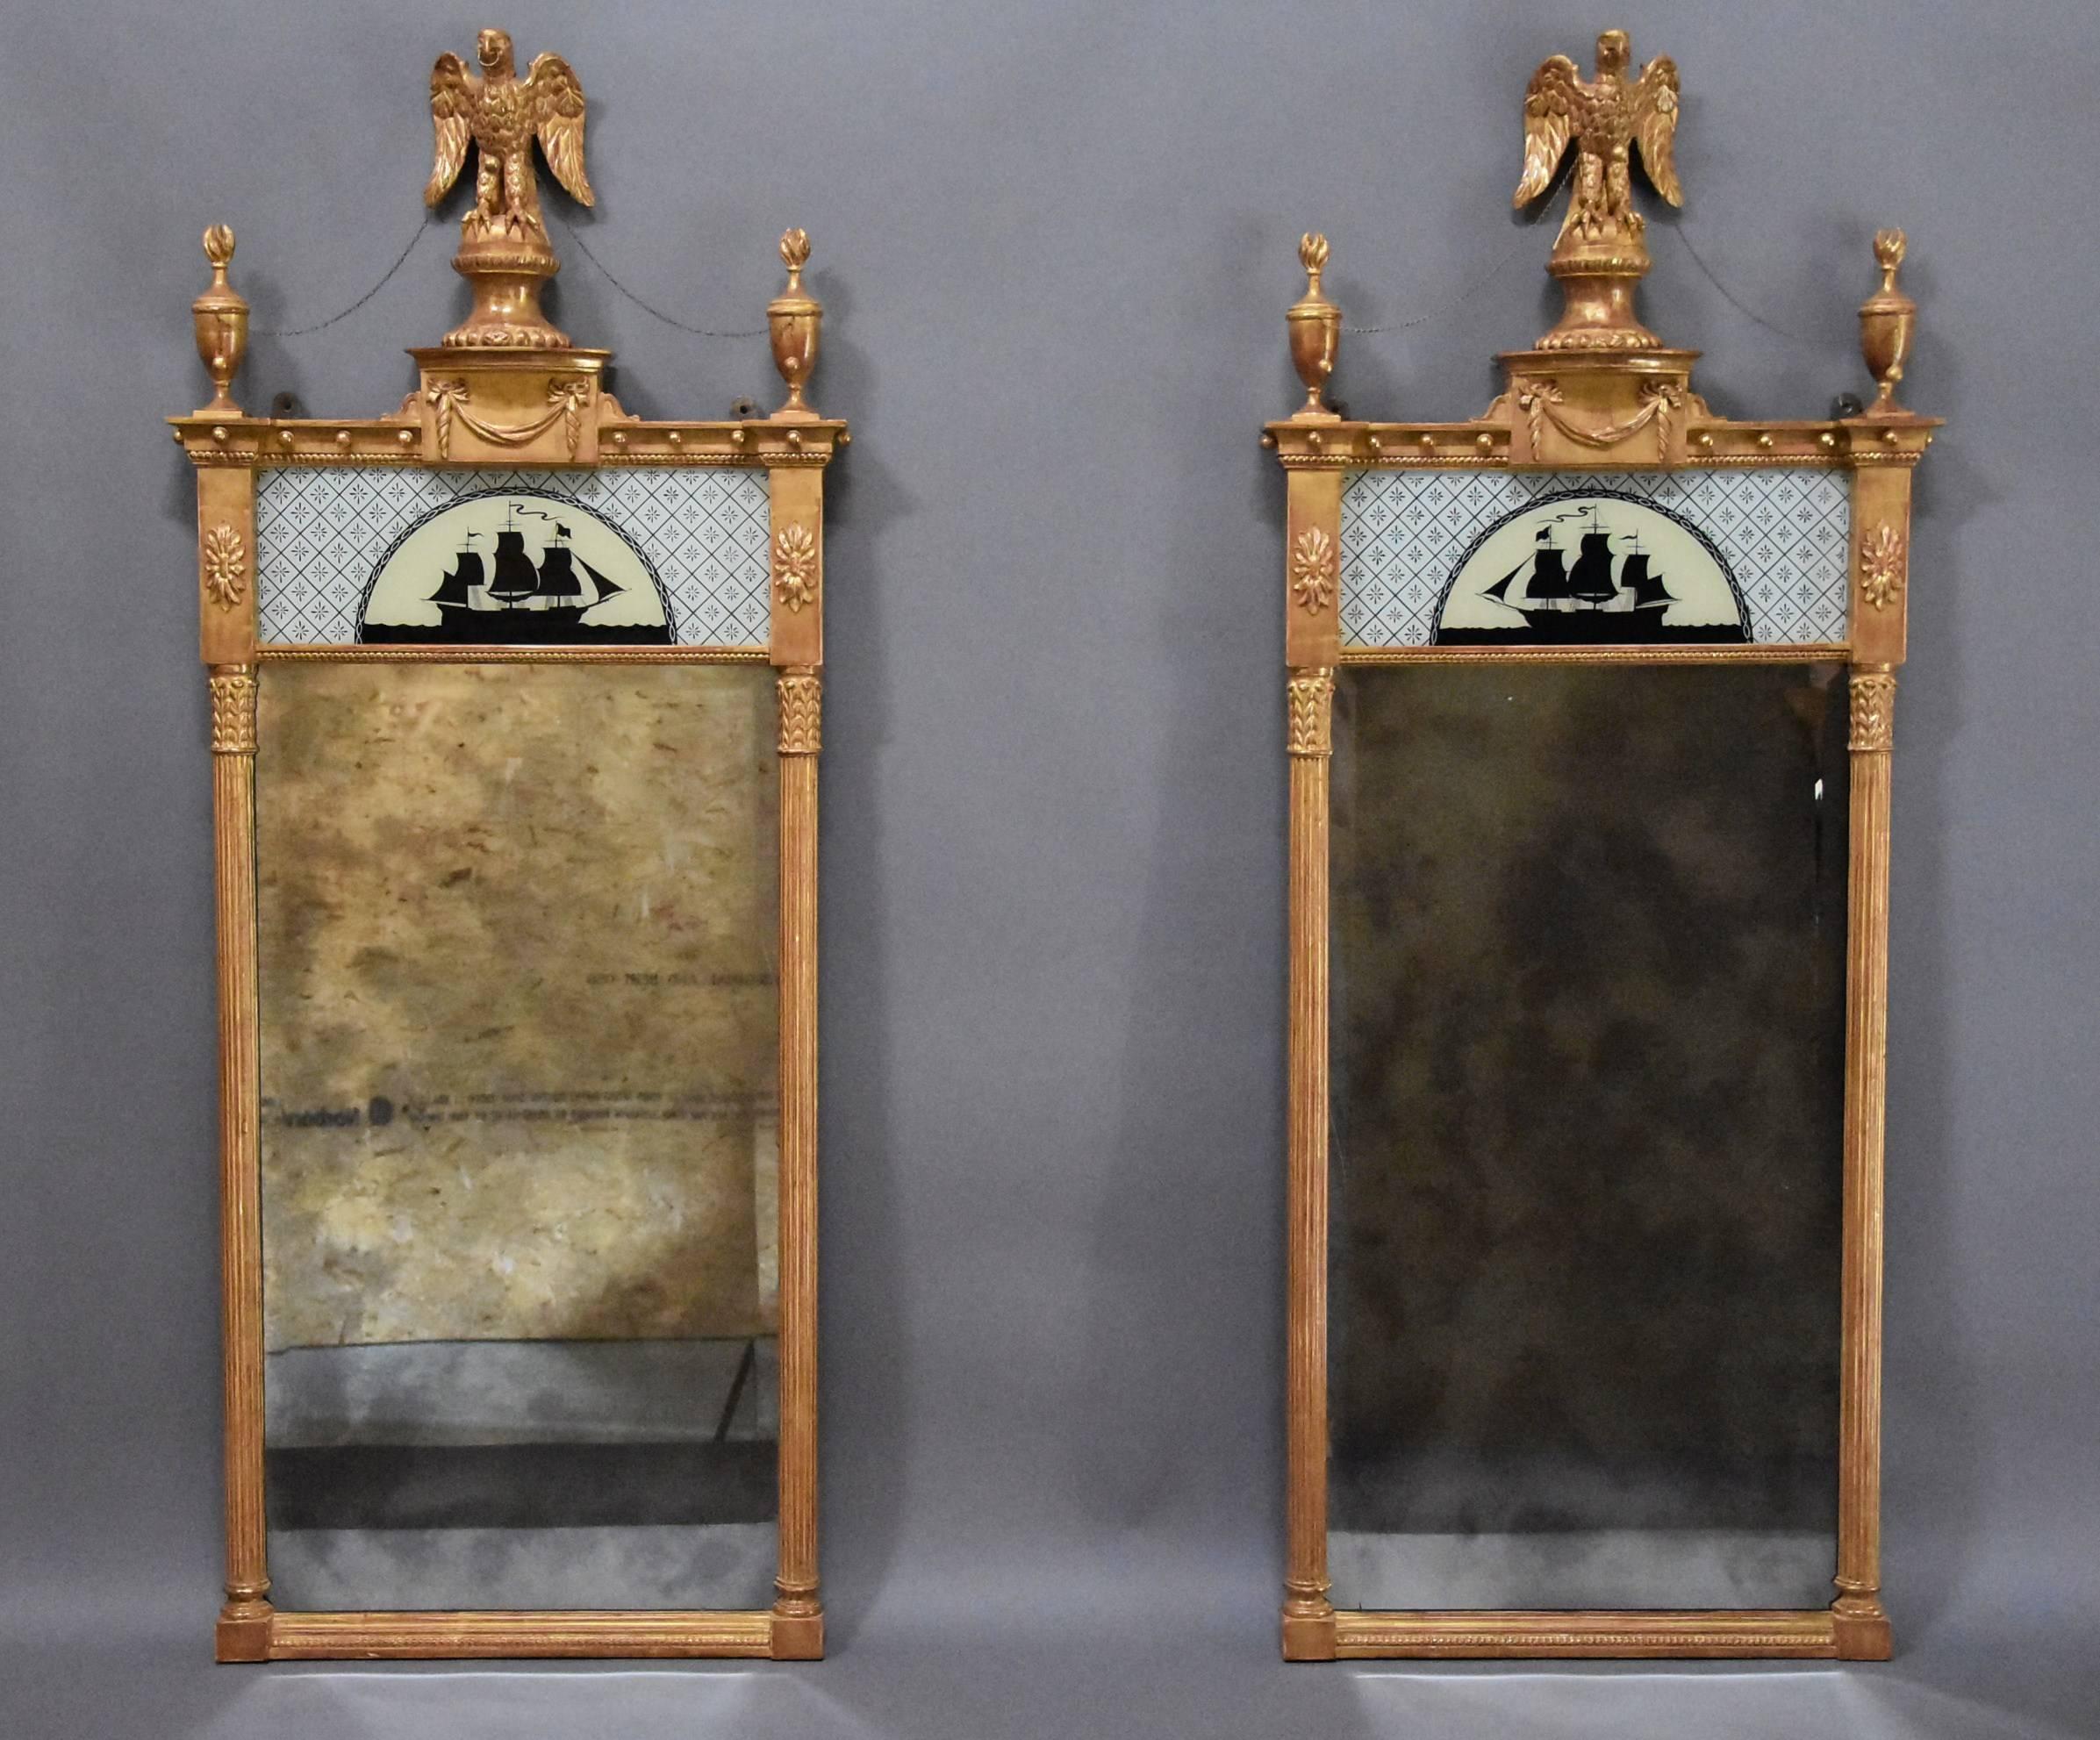 A superb pair of early 20th century carved giltwood pier mirrors in the Regency style.

This pair of mirrors consist of a finely carved eagle to the top supported by a carved dome topped pedestal with gadrooned edge leading down to a bow form